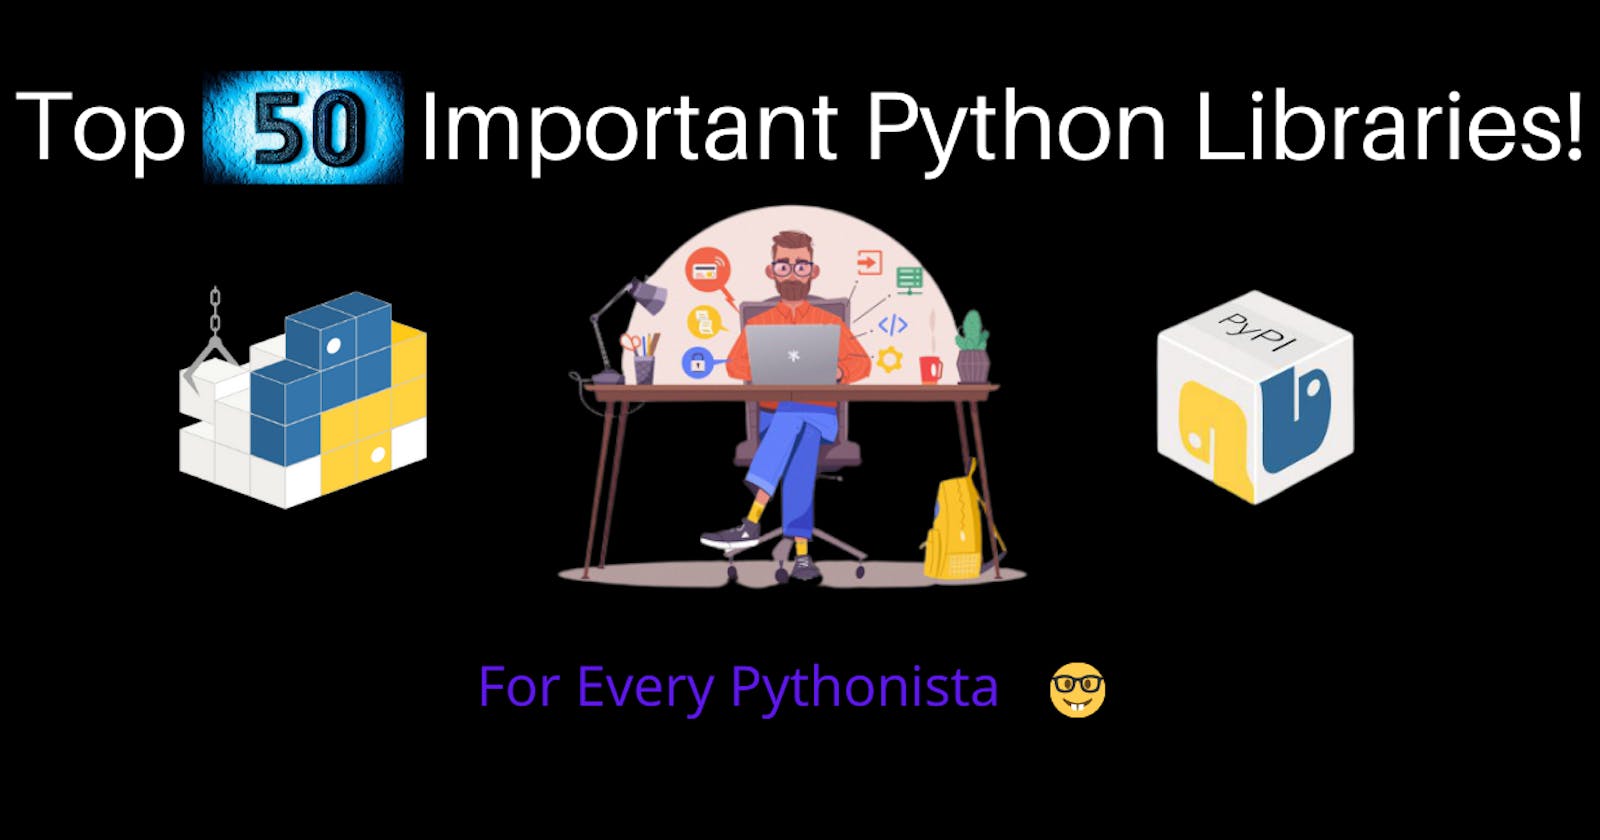 Top 50 Important Python Libraries!